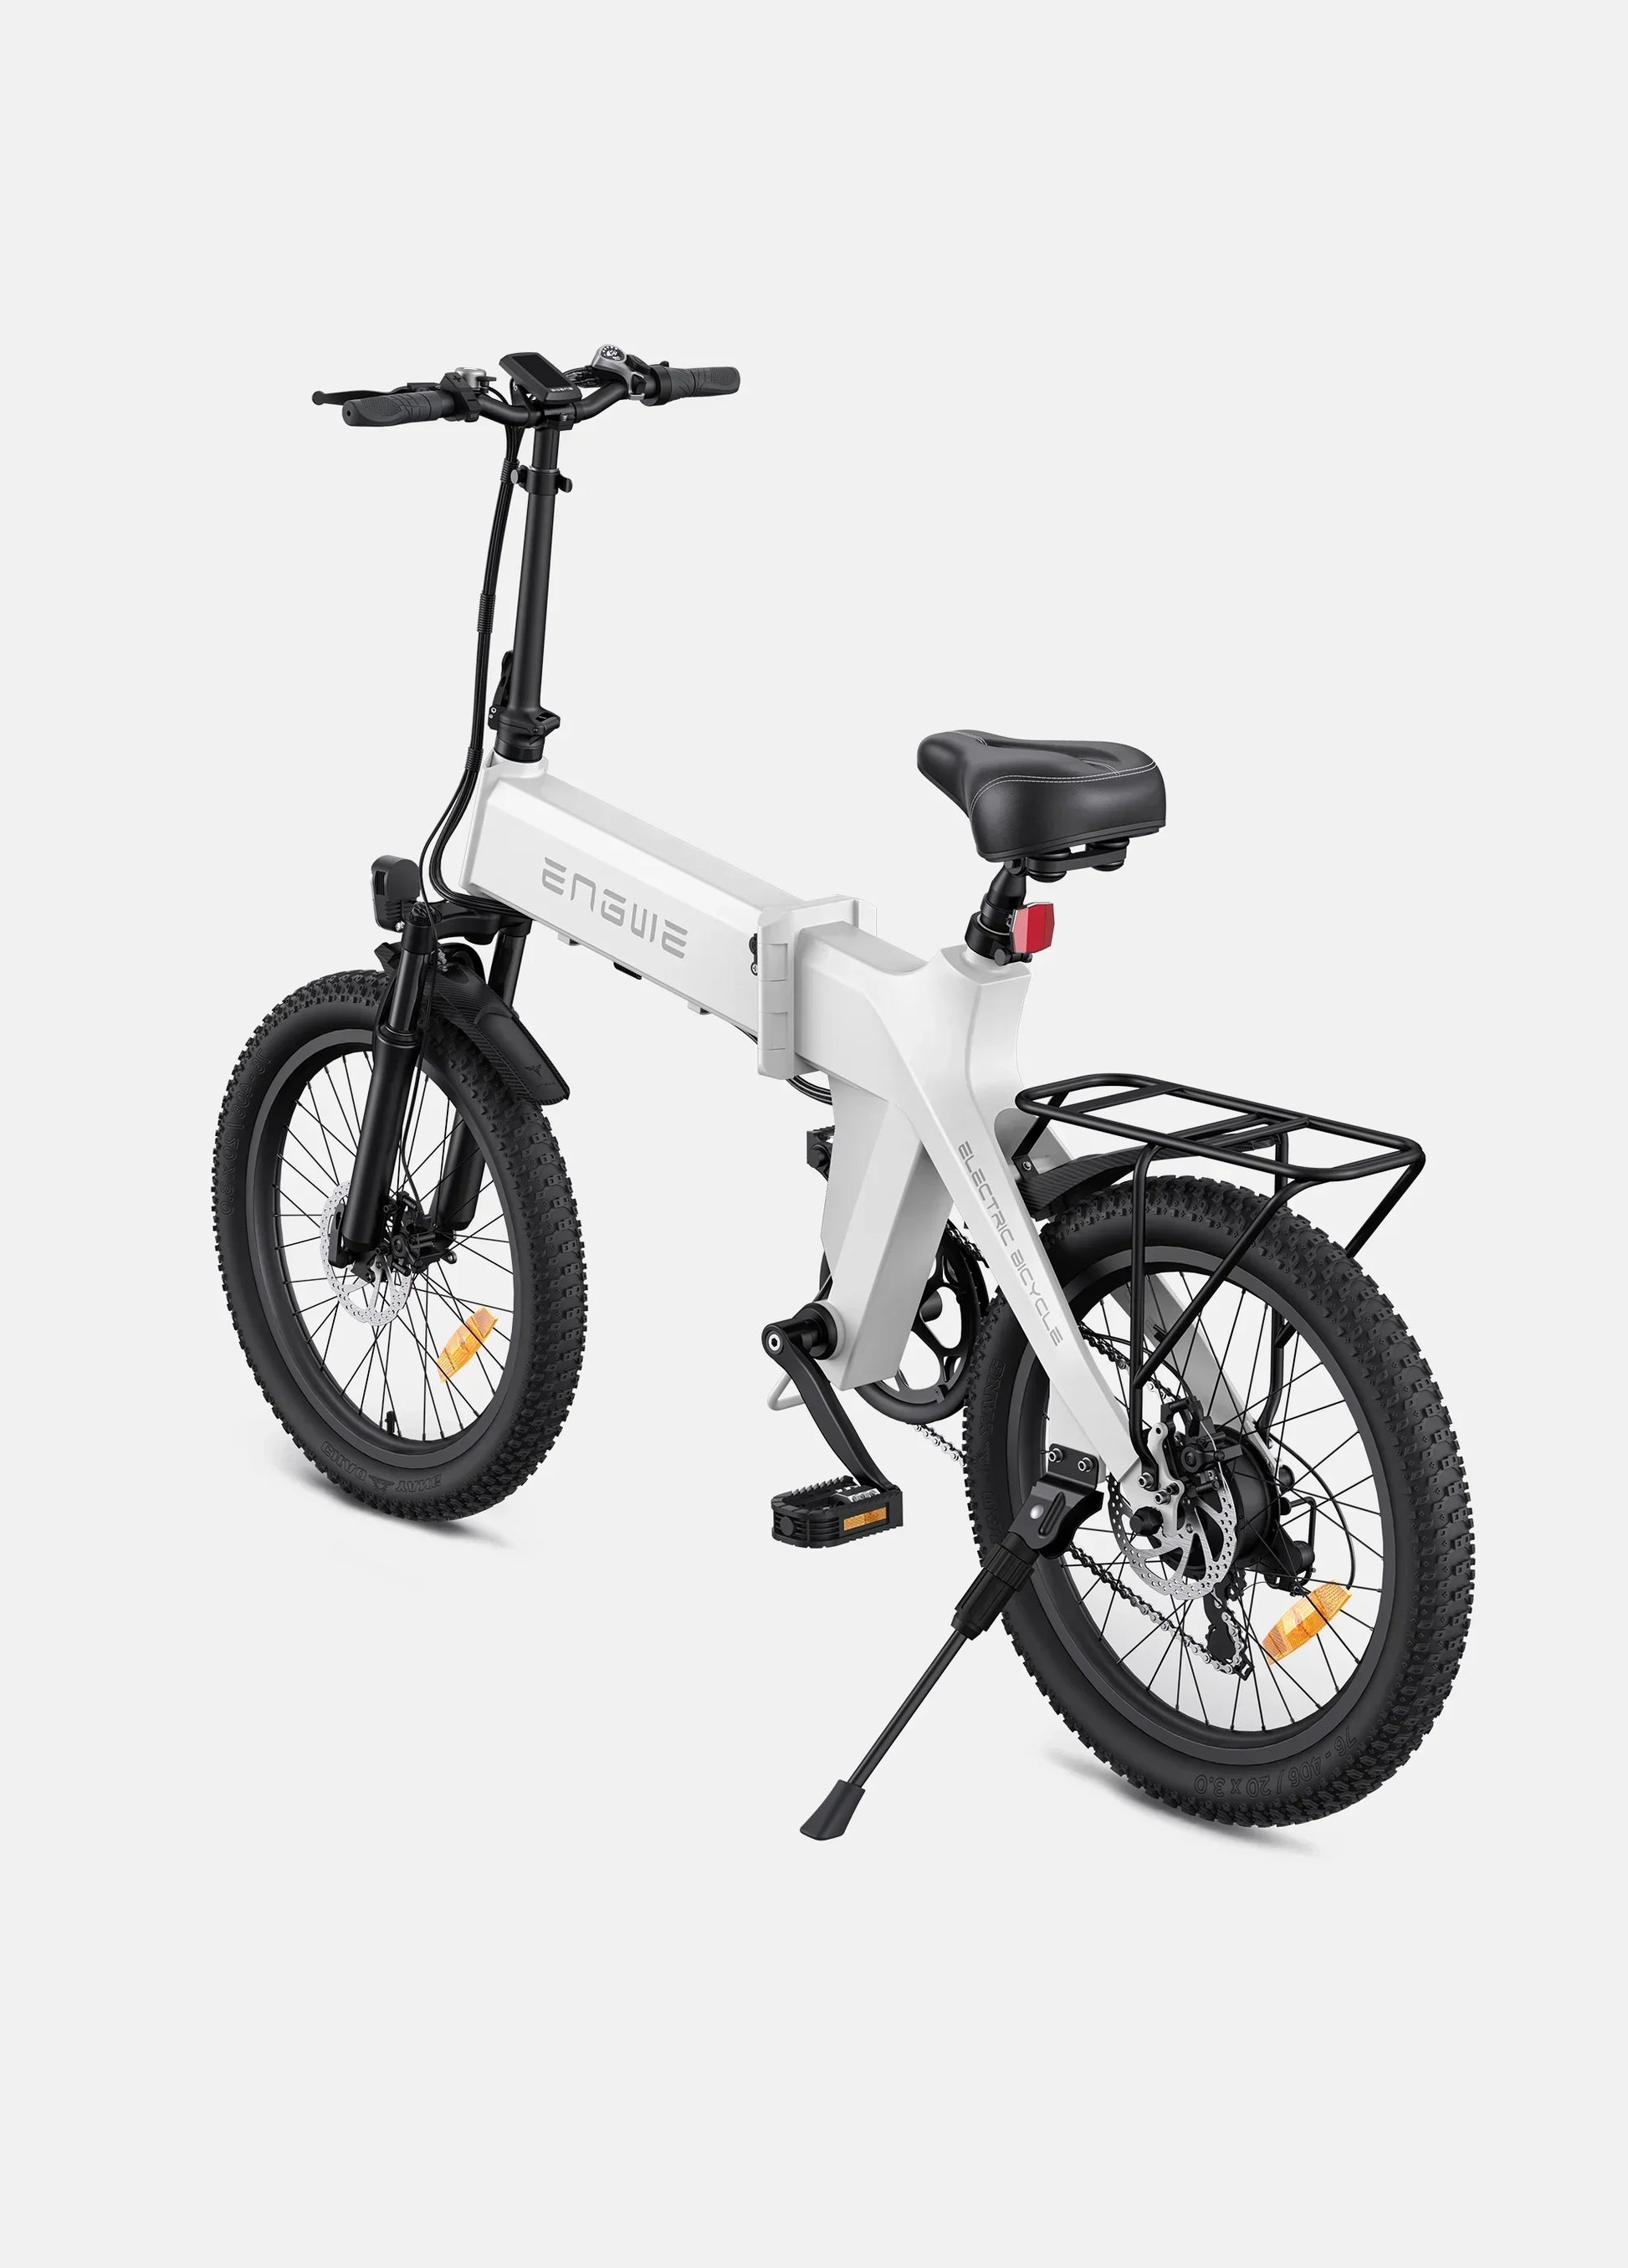 ENGWE C20 Pro (Upgraded Version) Folding Electric Bike - Pogo Cycles available in cycle to work